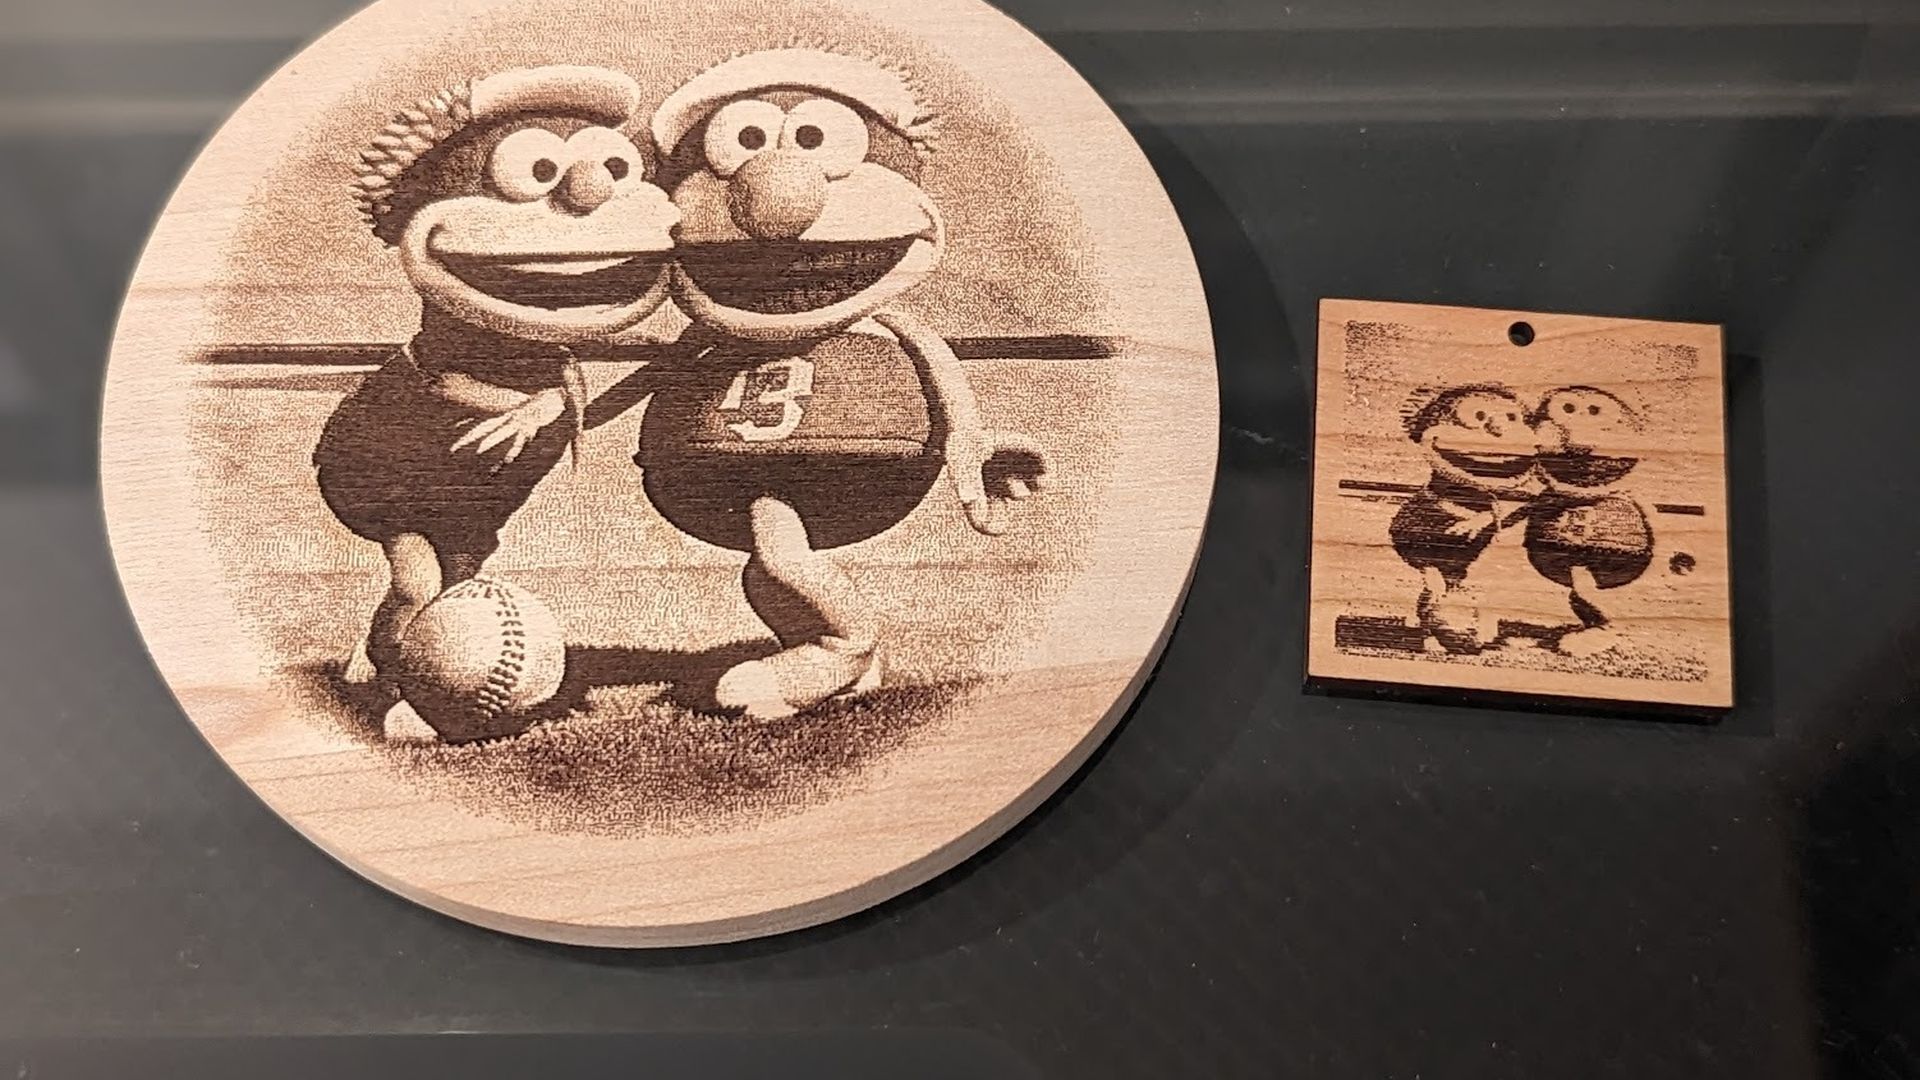 A 3D print of a design based on the prompt "Muppets playing softball"